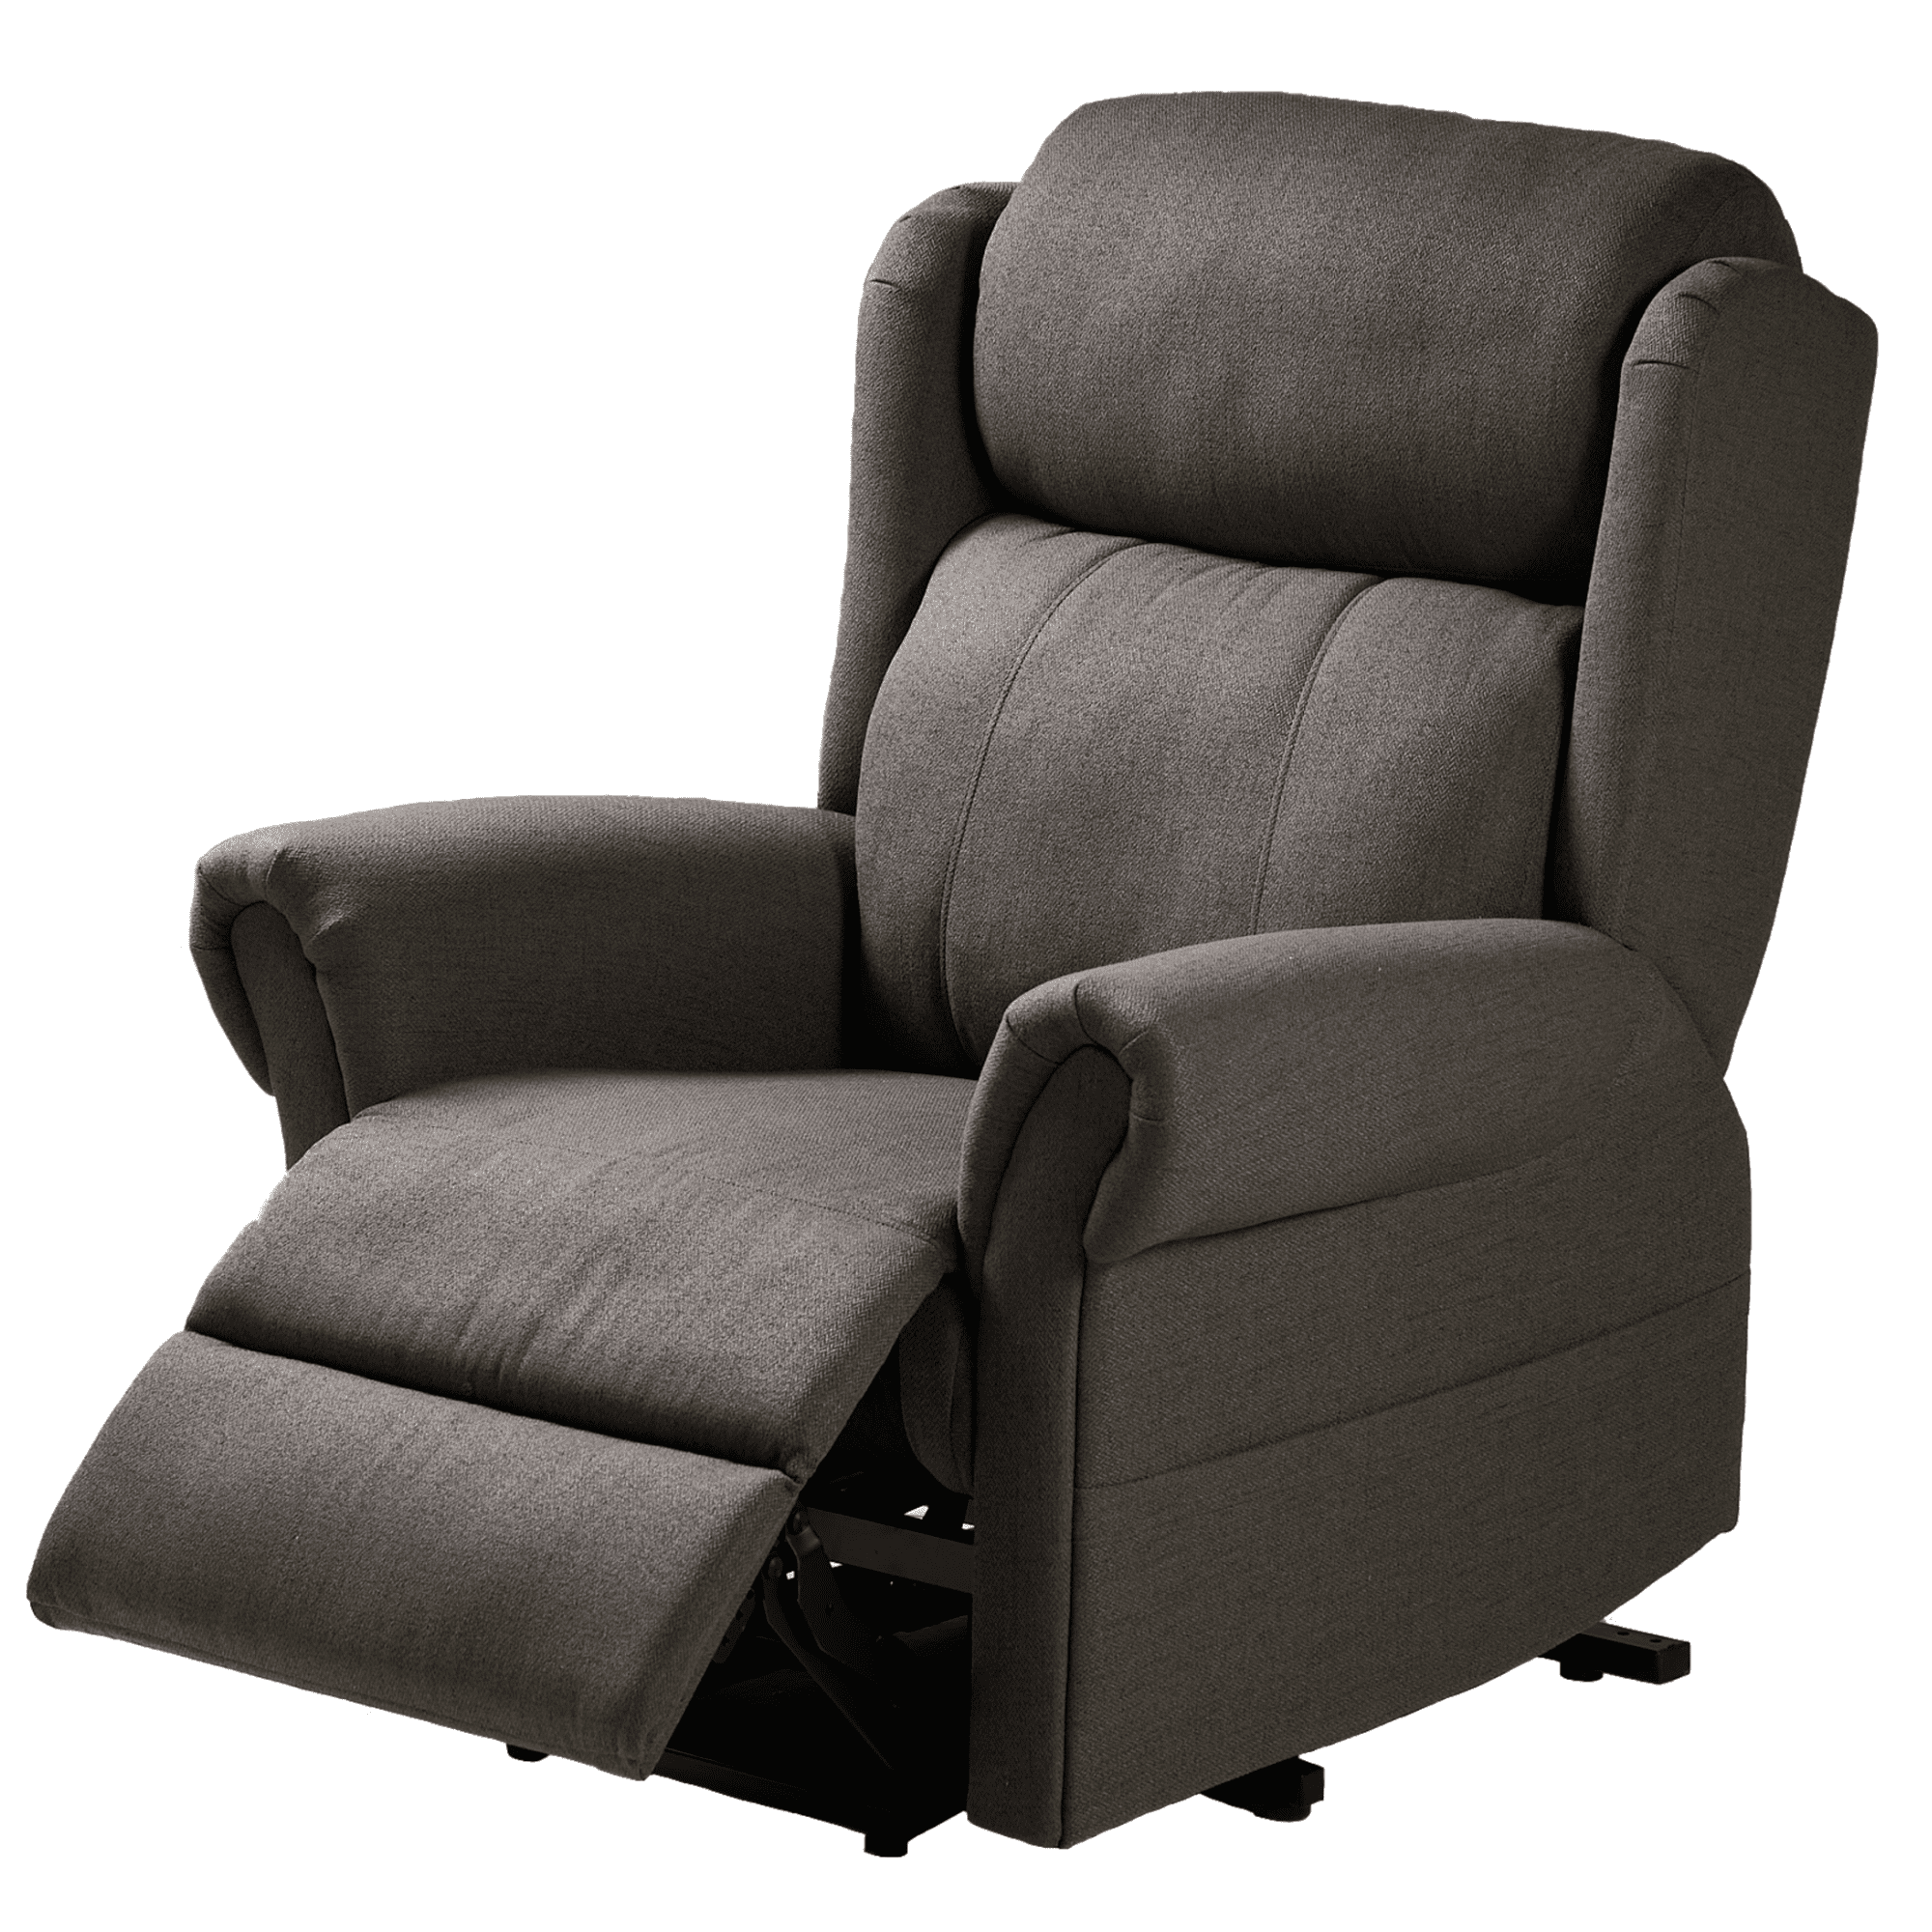 SonderCare Essence Lift Chair Product Page Read Position Image (1)